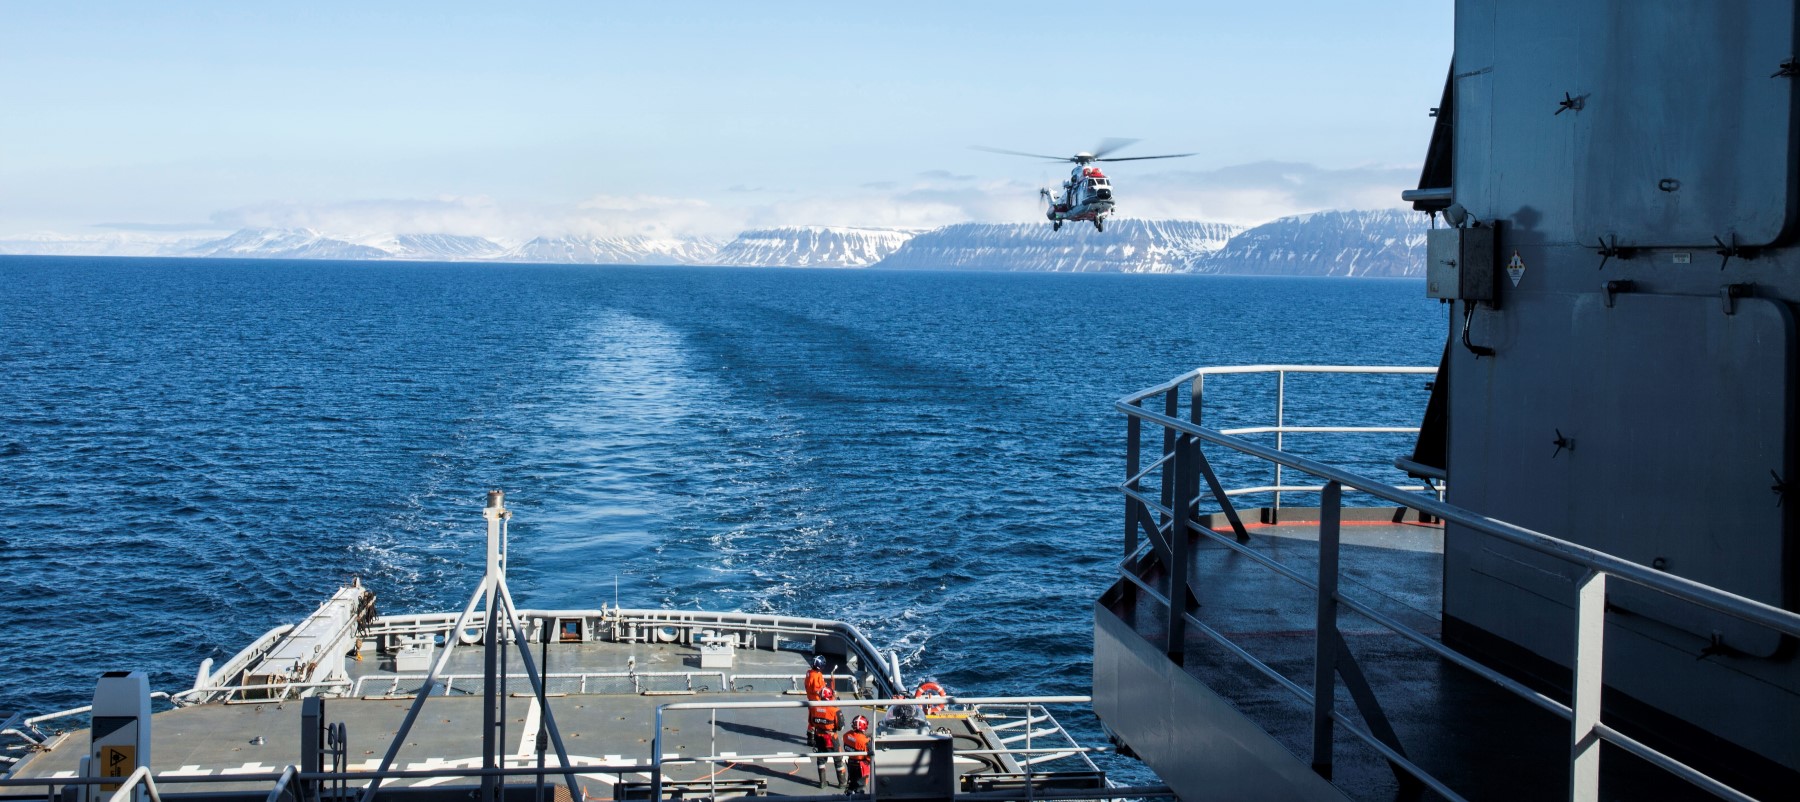 ArcticInfo is especially aimed at fishing boats, cruise traffic and research and expedition vessels, which dominate traffic in Arctic areas. Photo: The Coast Guard.